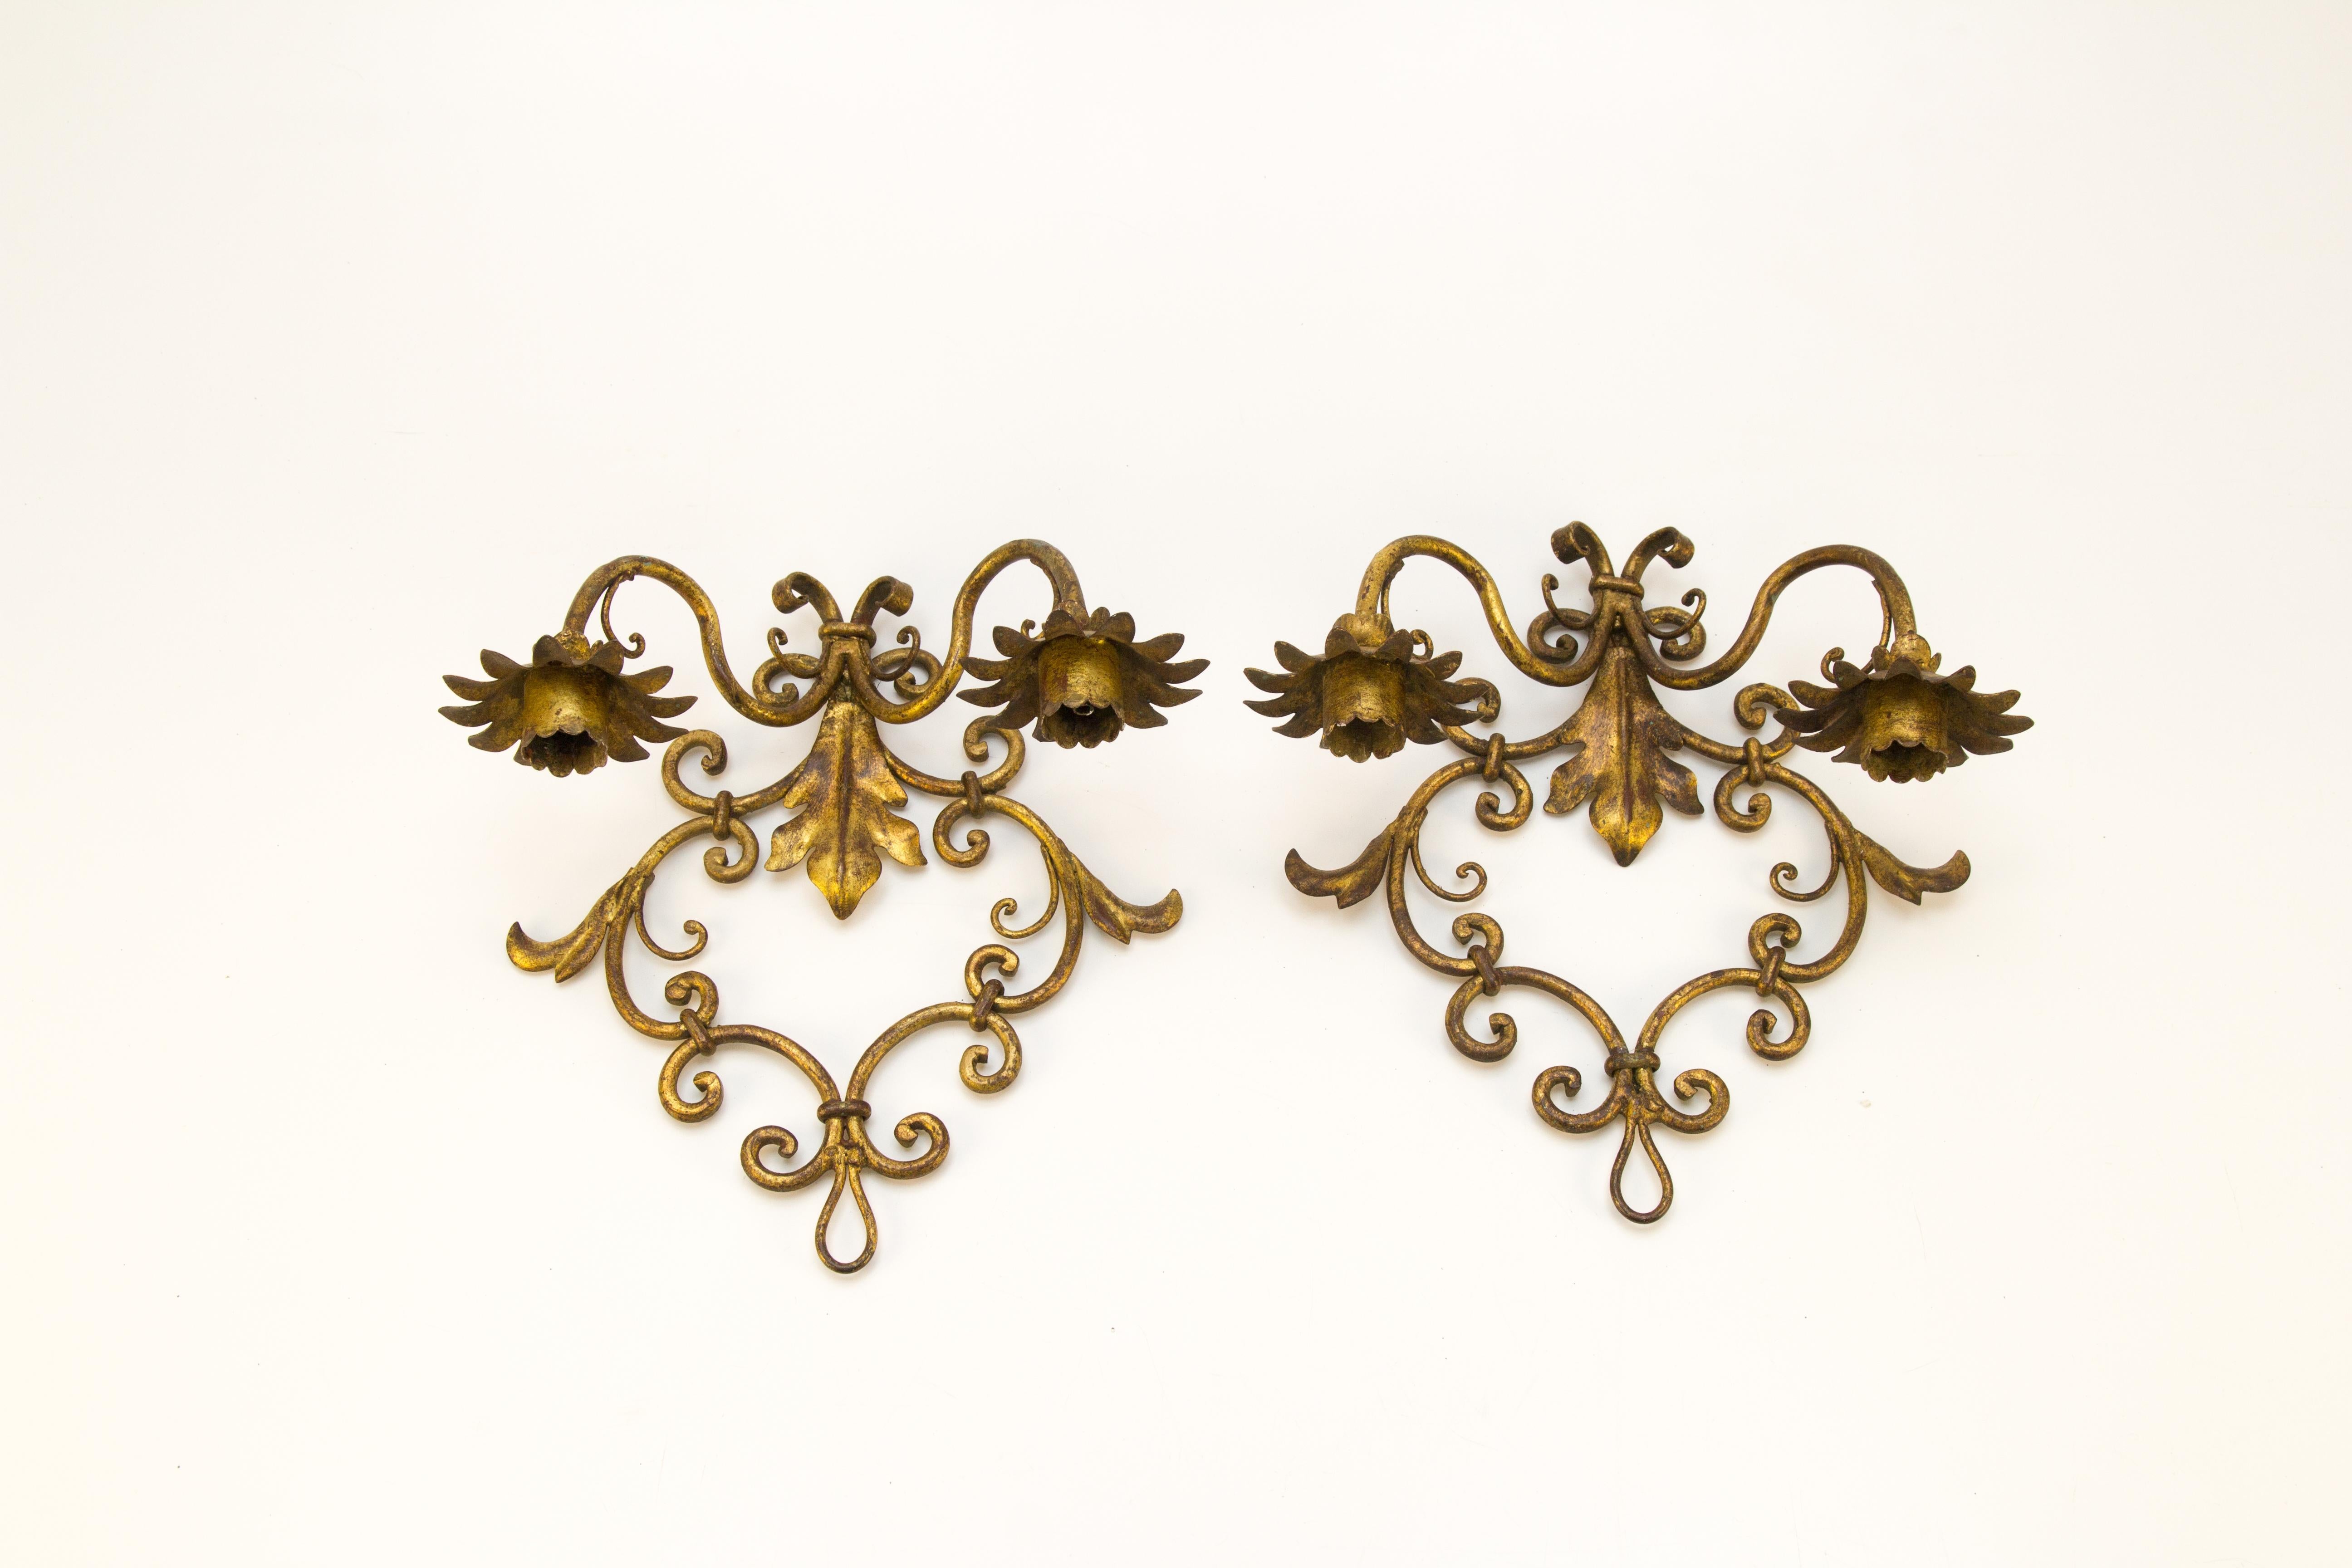 Pair of Italian Hollywood Regency Style Gilt Metal Candle Wall Sconces For Sale 2